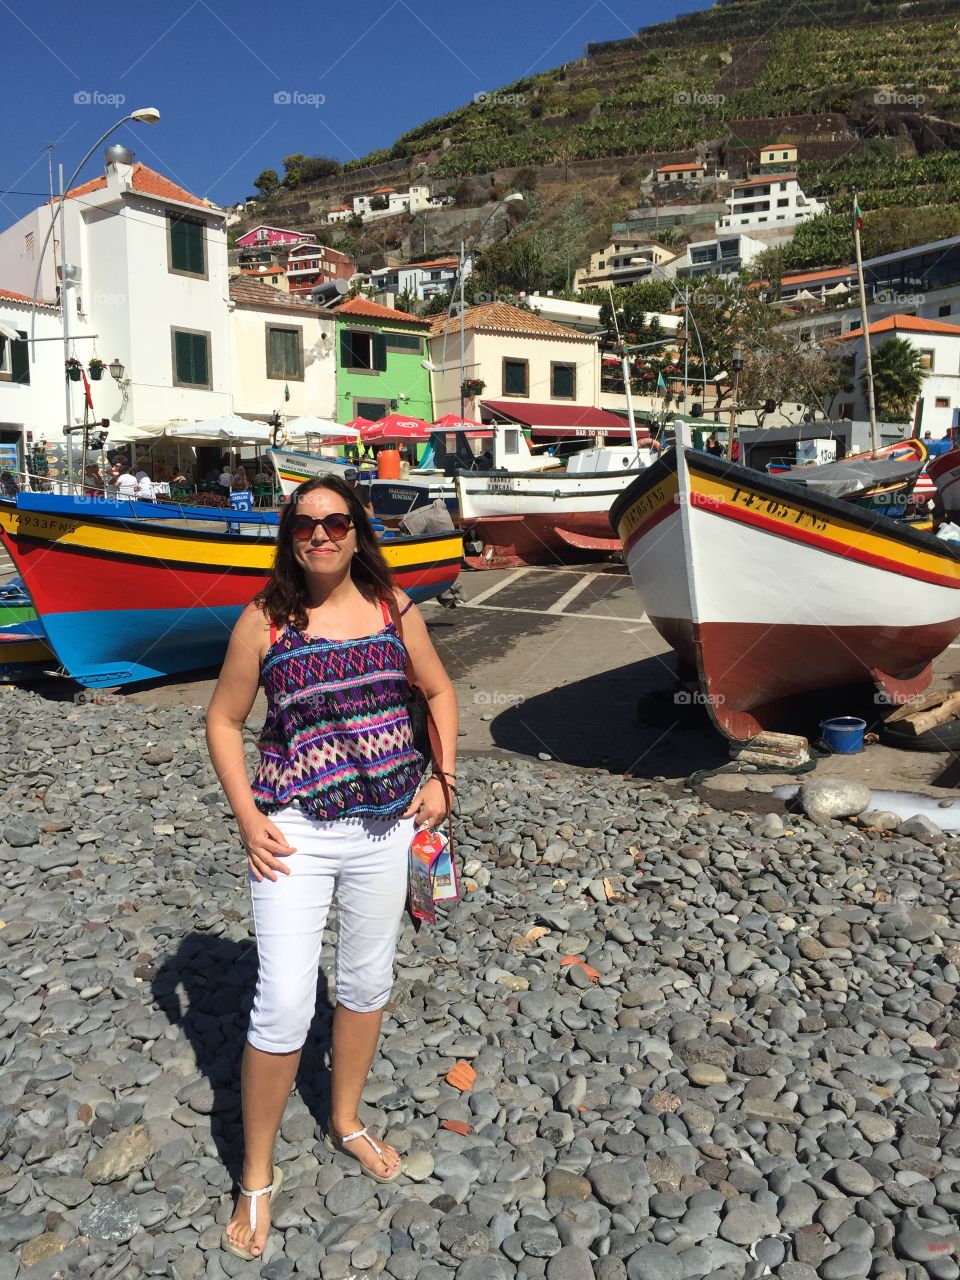 Me in a fishing village